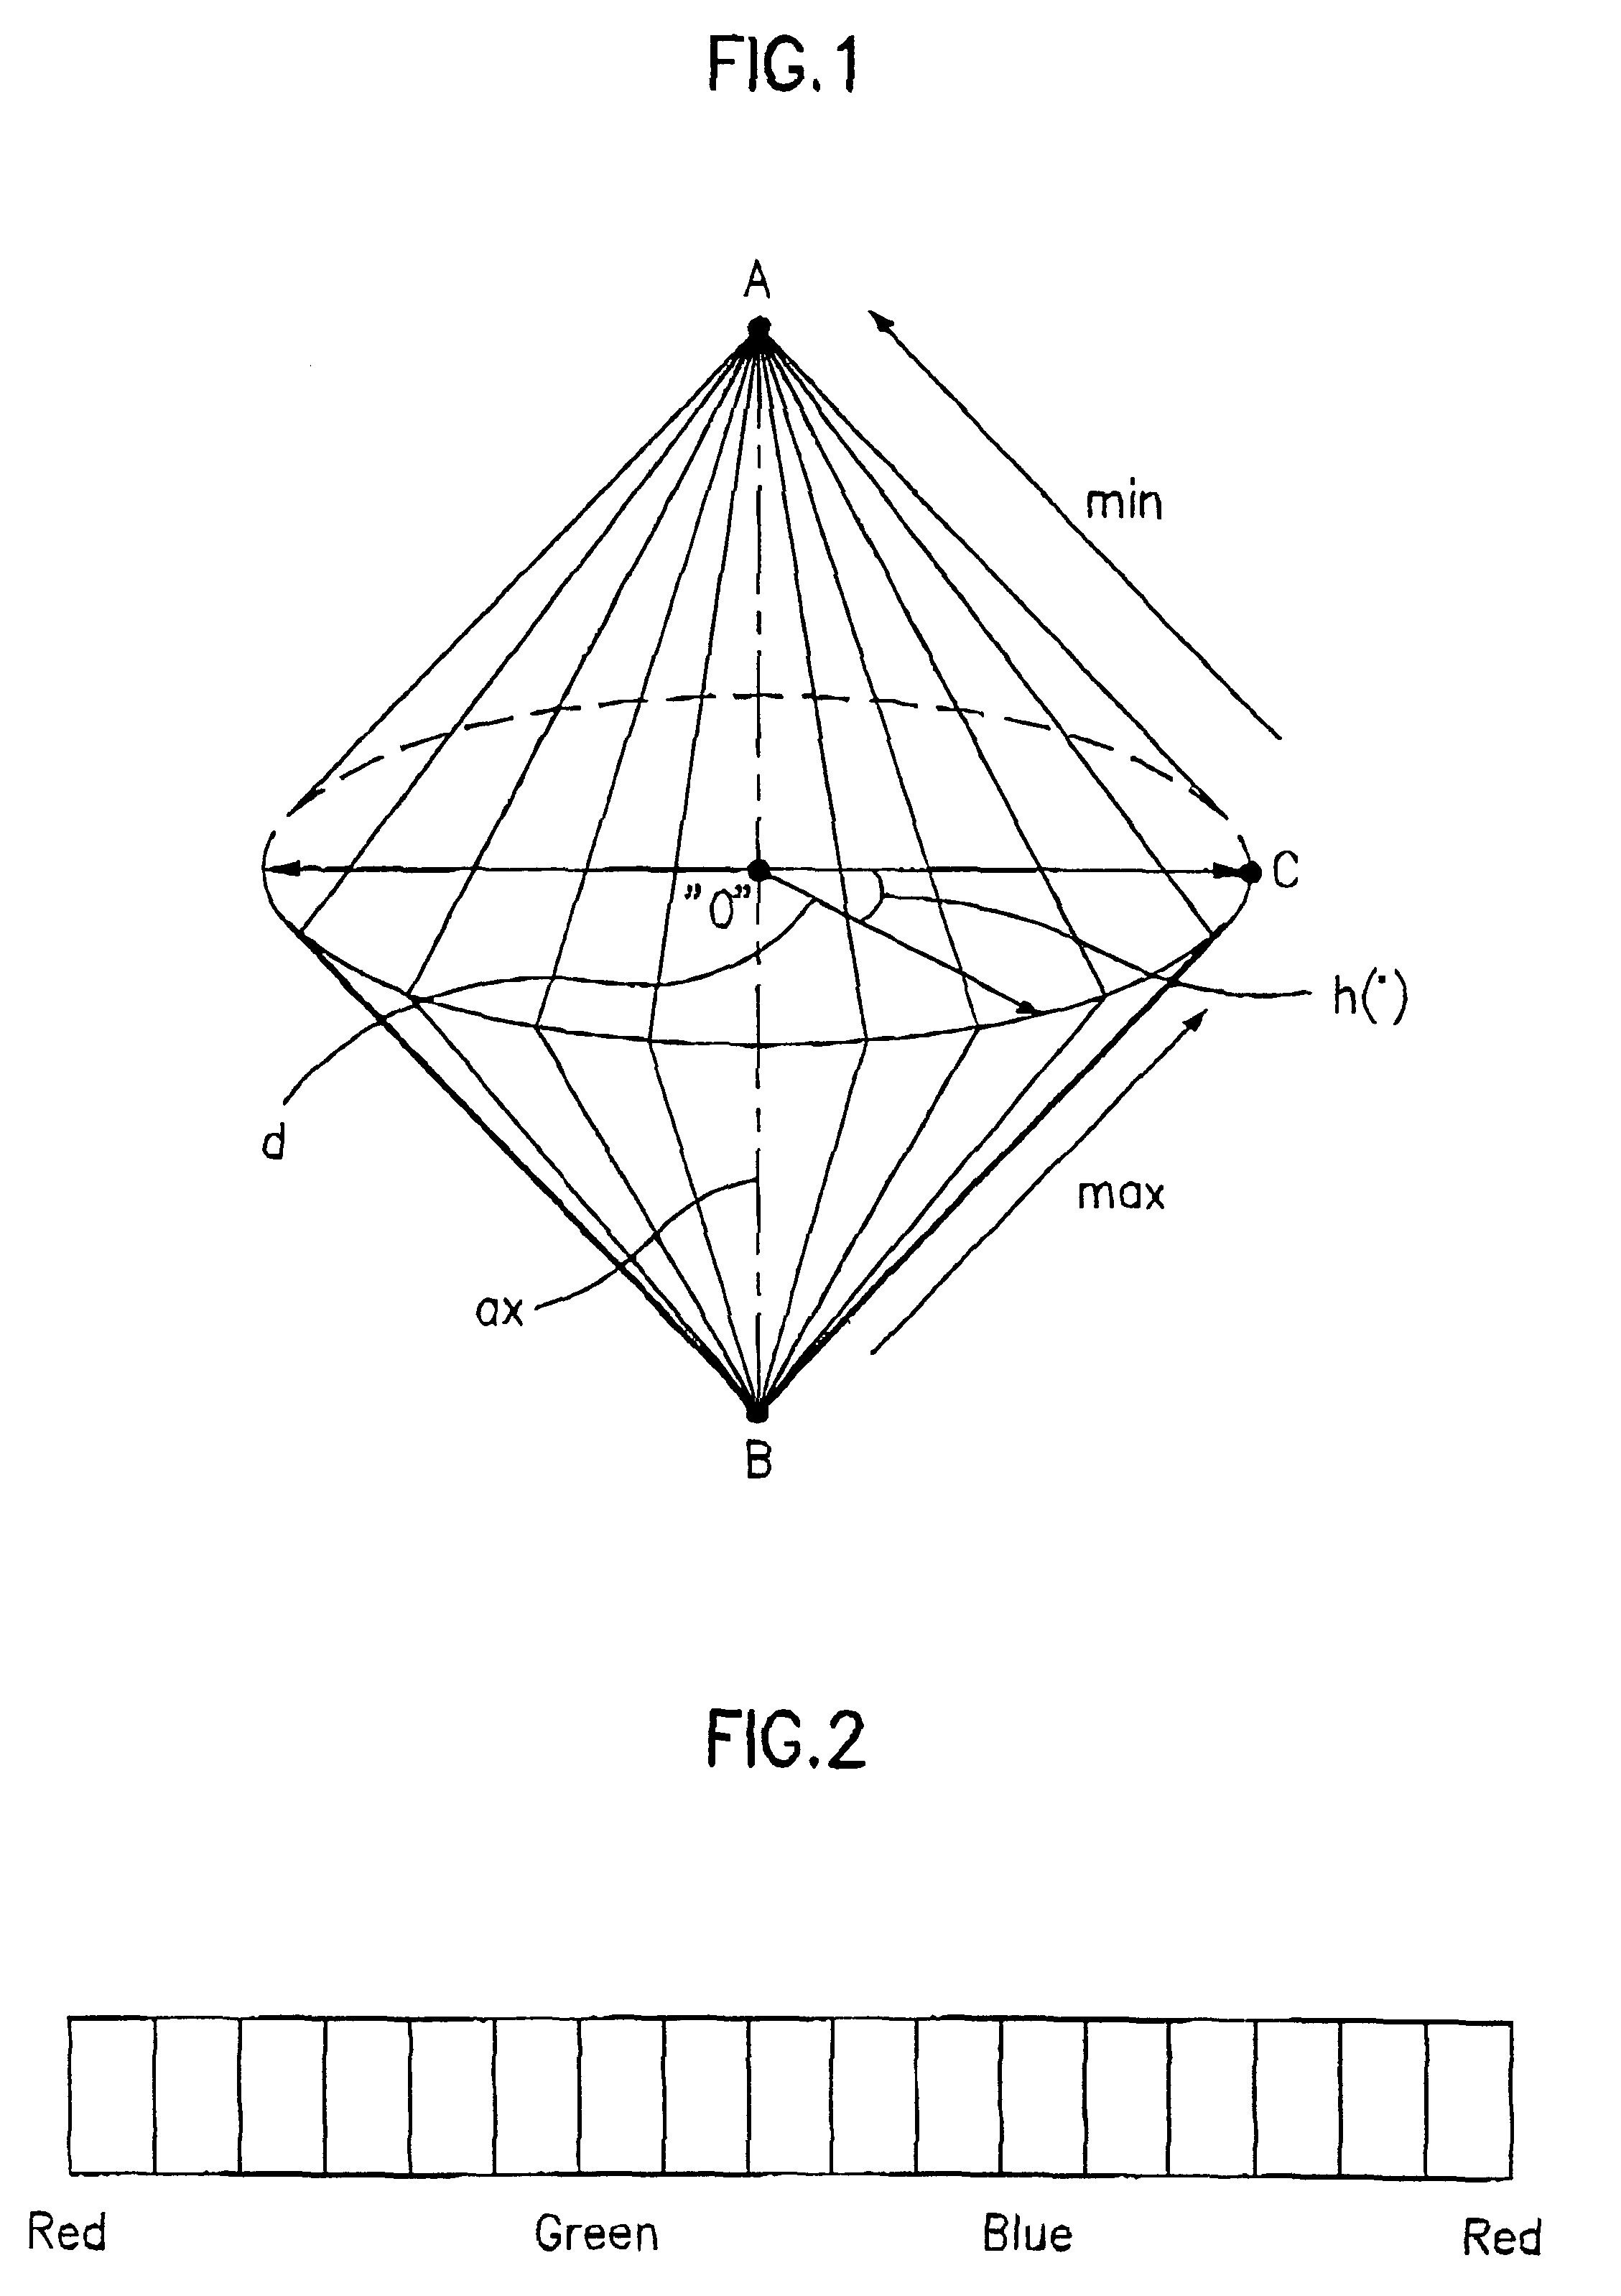 HMMD color space and method for quantizing color using HMMD space and color spreading